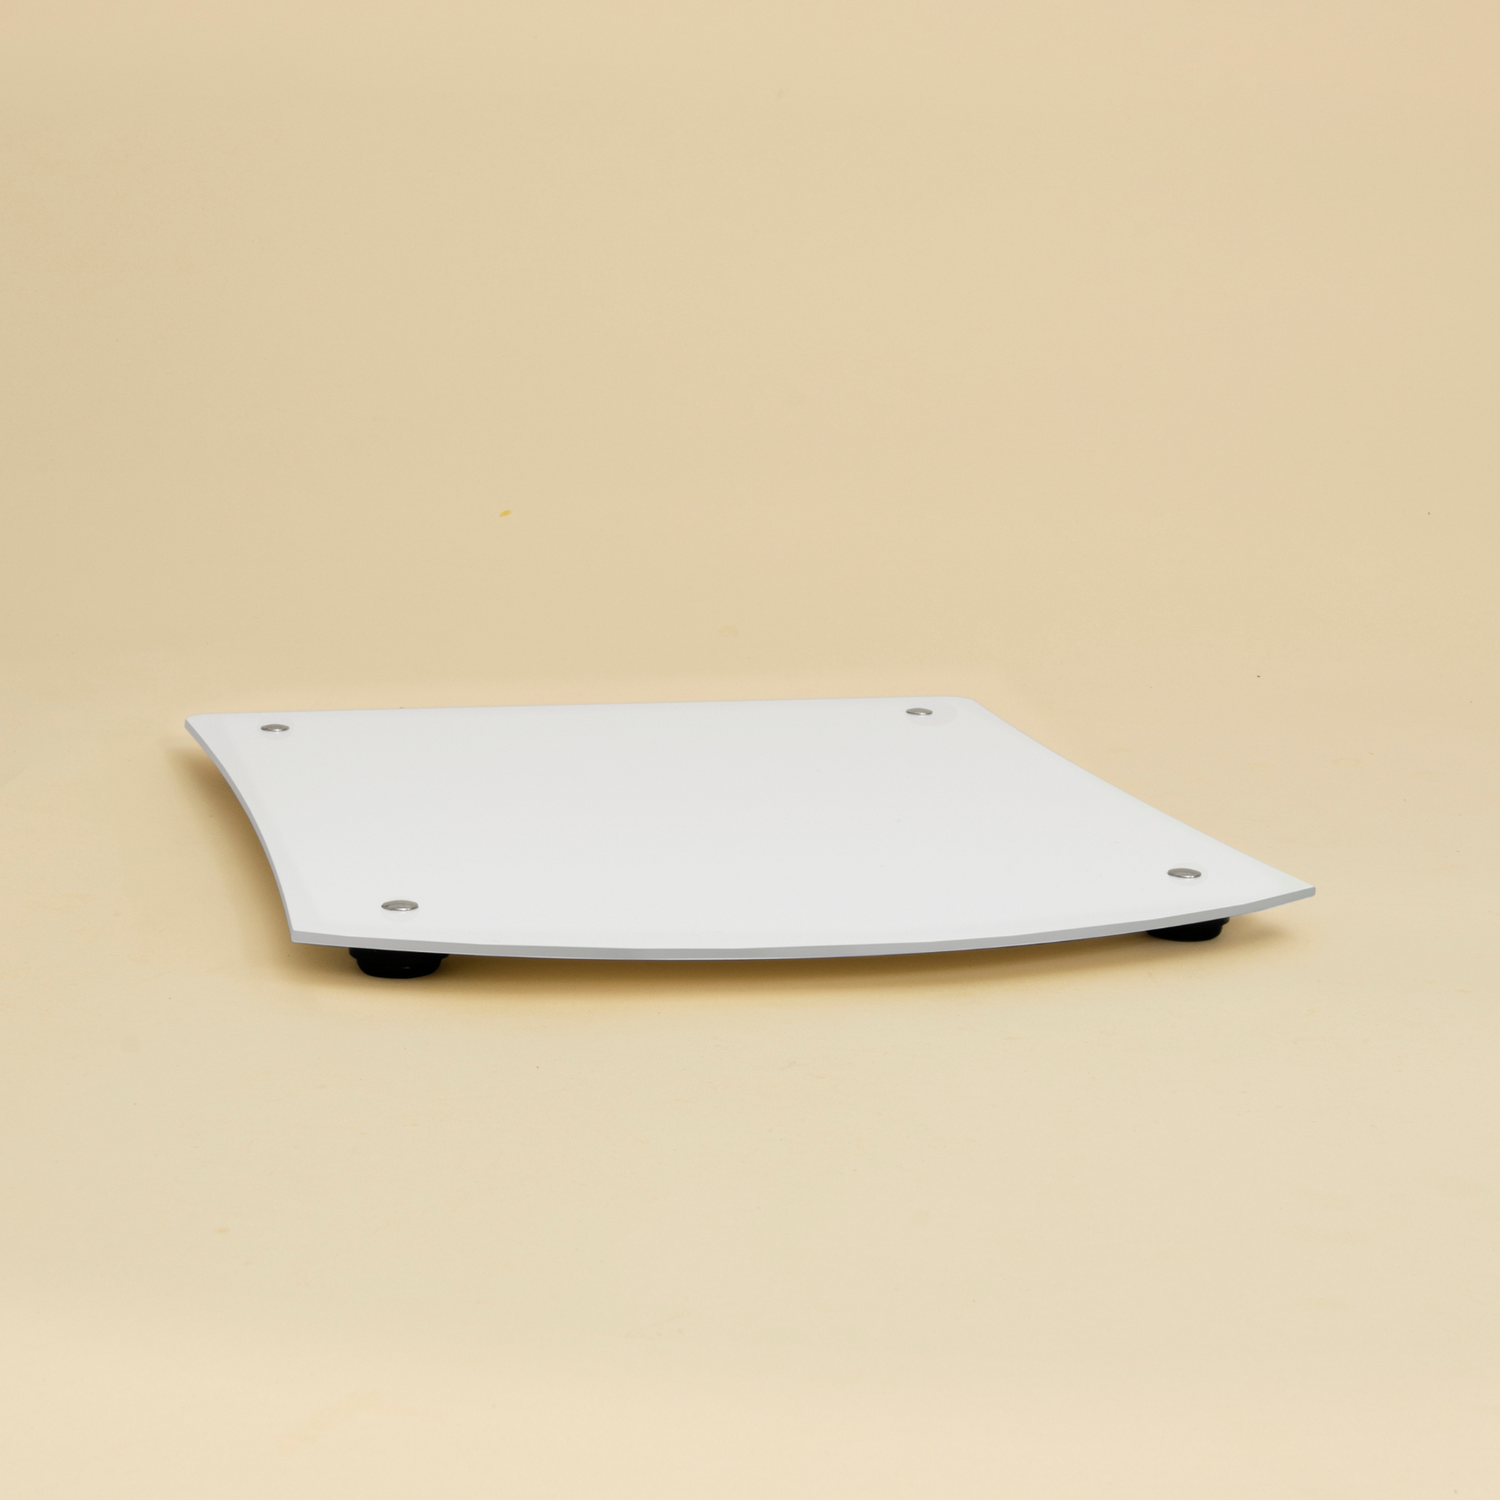 B-stock: Sliding board suitable for the Thermomix TM6 and TM5 in pearl white